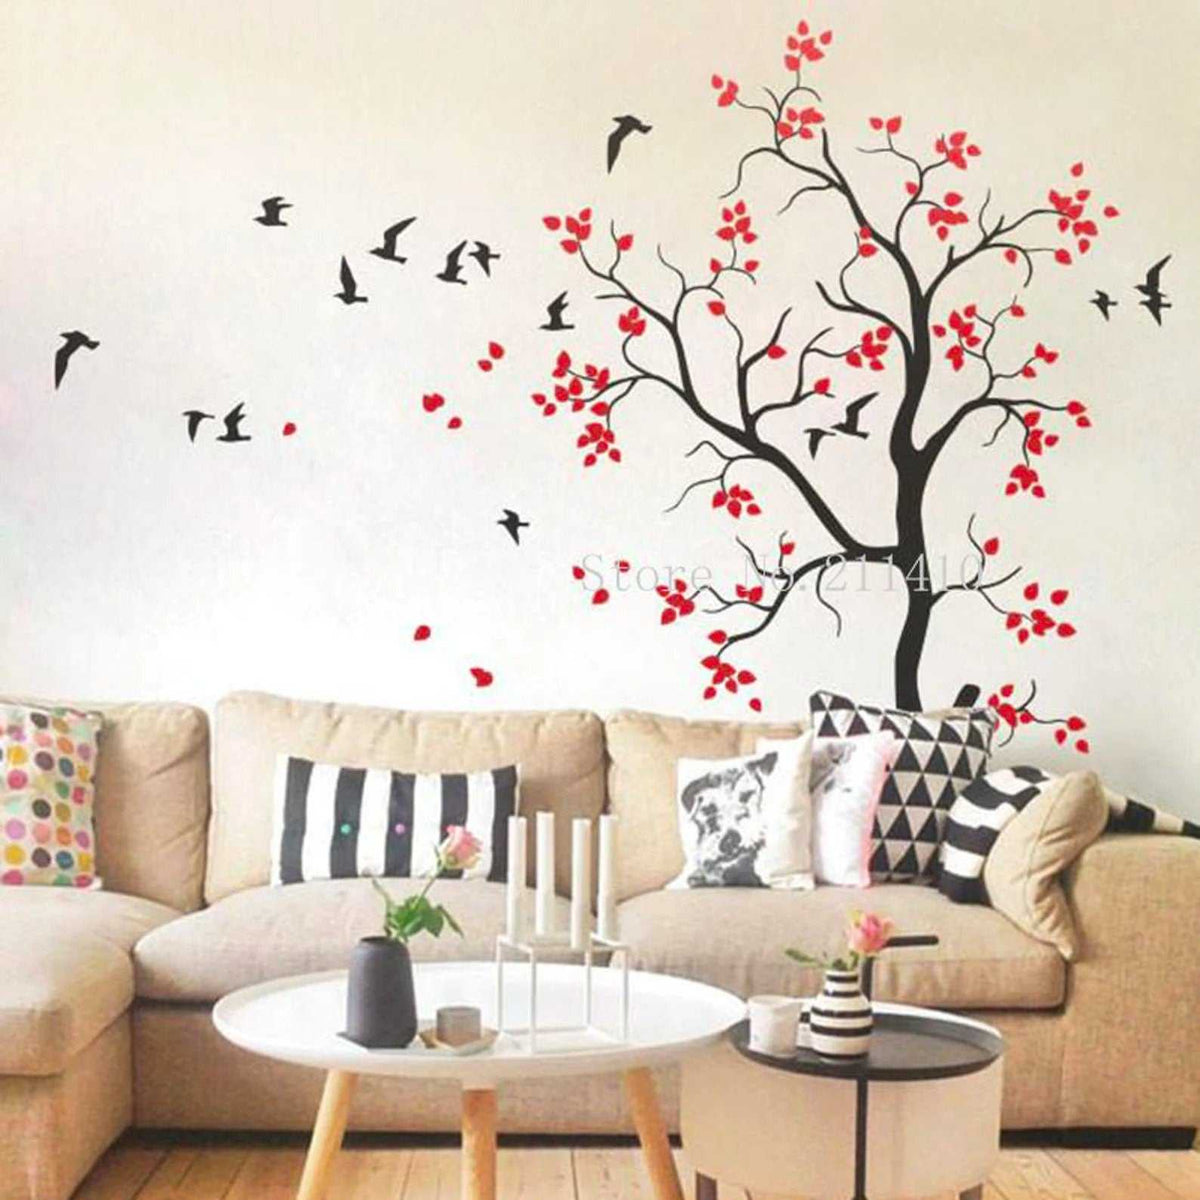 Large Tree Wall Sticker with Flying Birds | Living Room wall decal